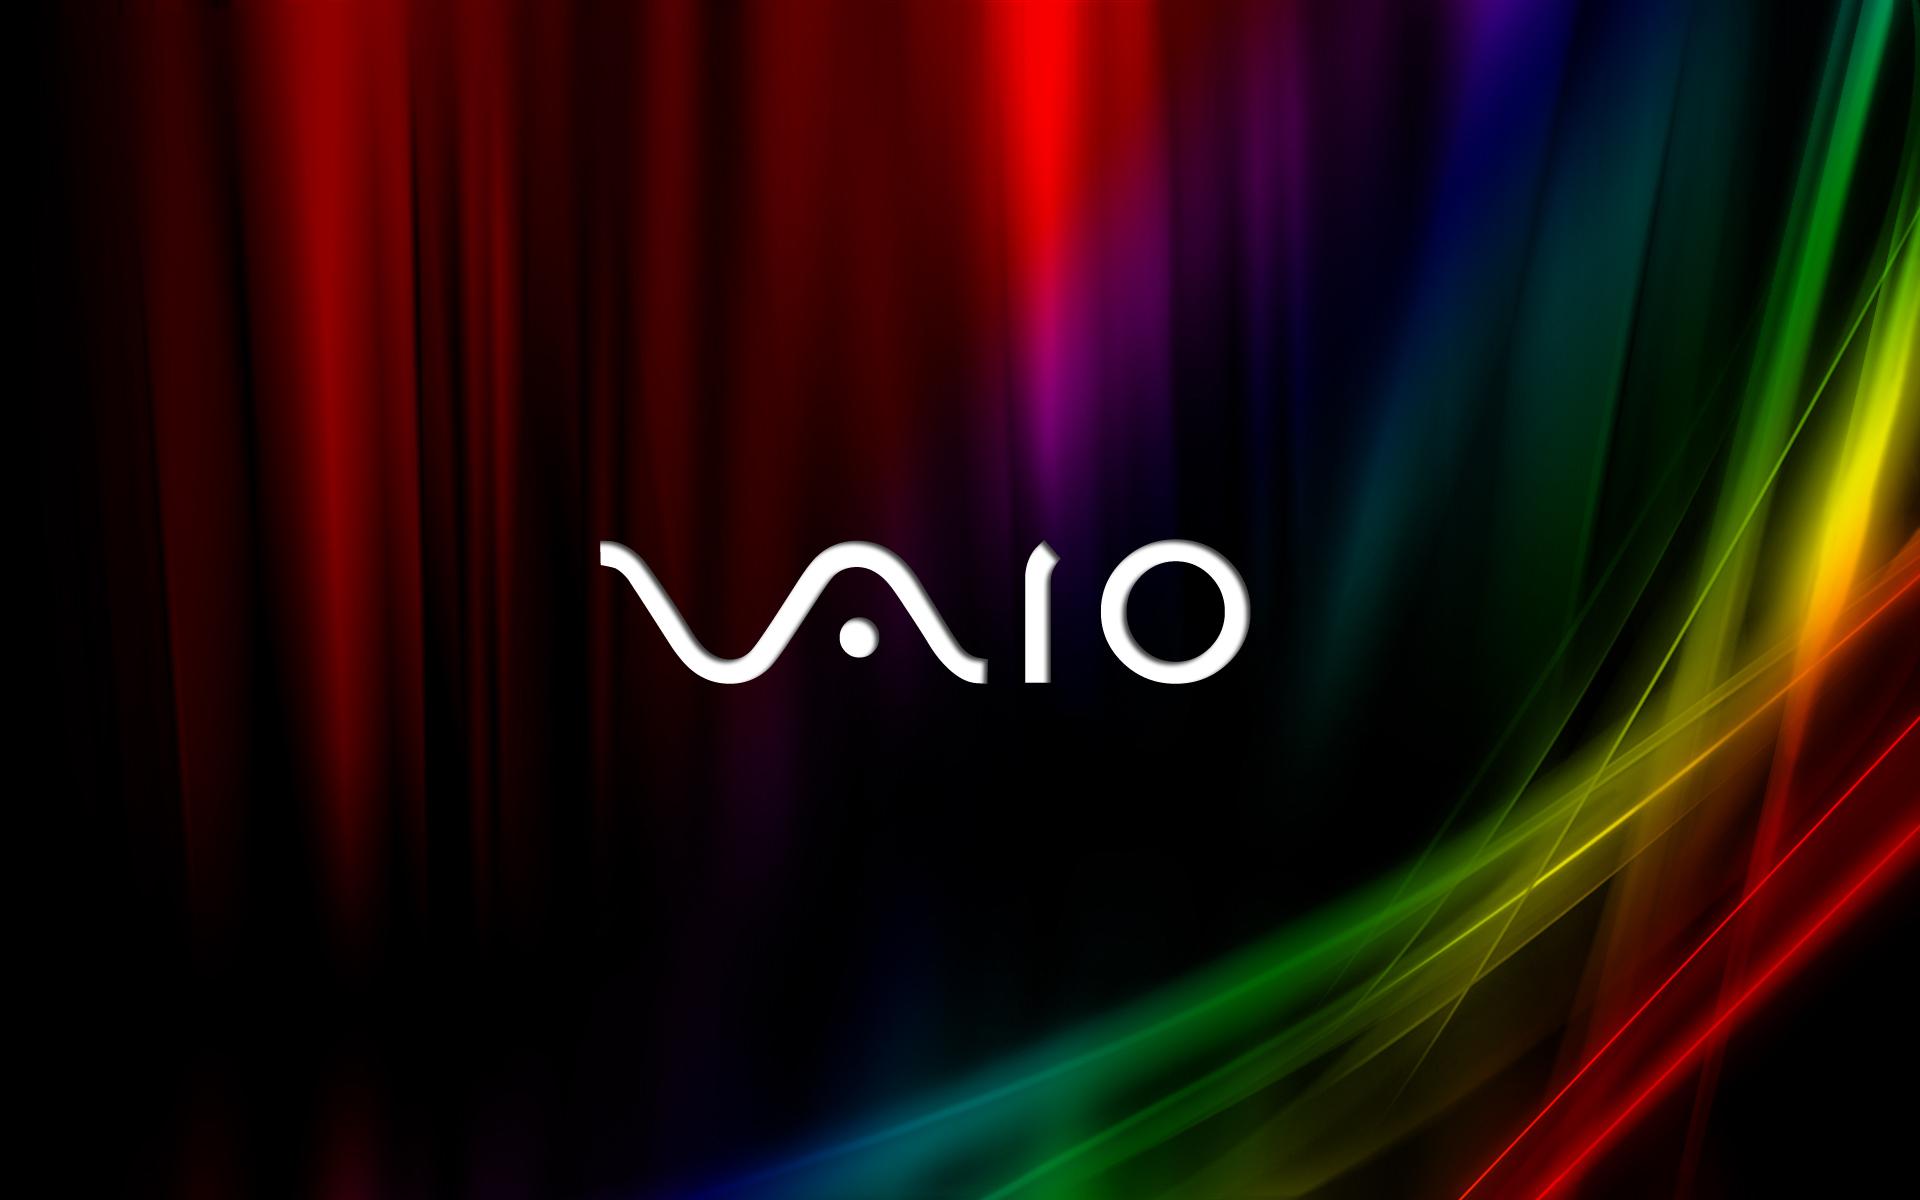 Sony Vaio Laptop Wallpapers Top Free Sony Vaio Laptop Backgrounds Wallpaperaccess